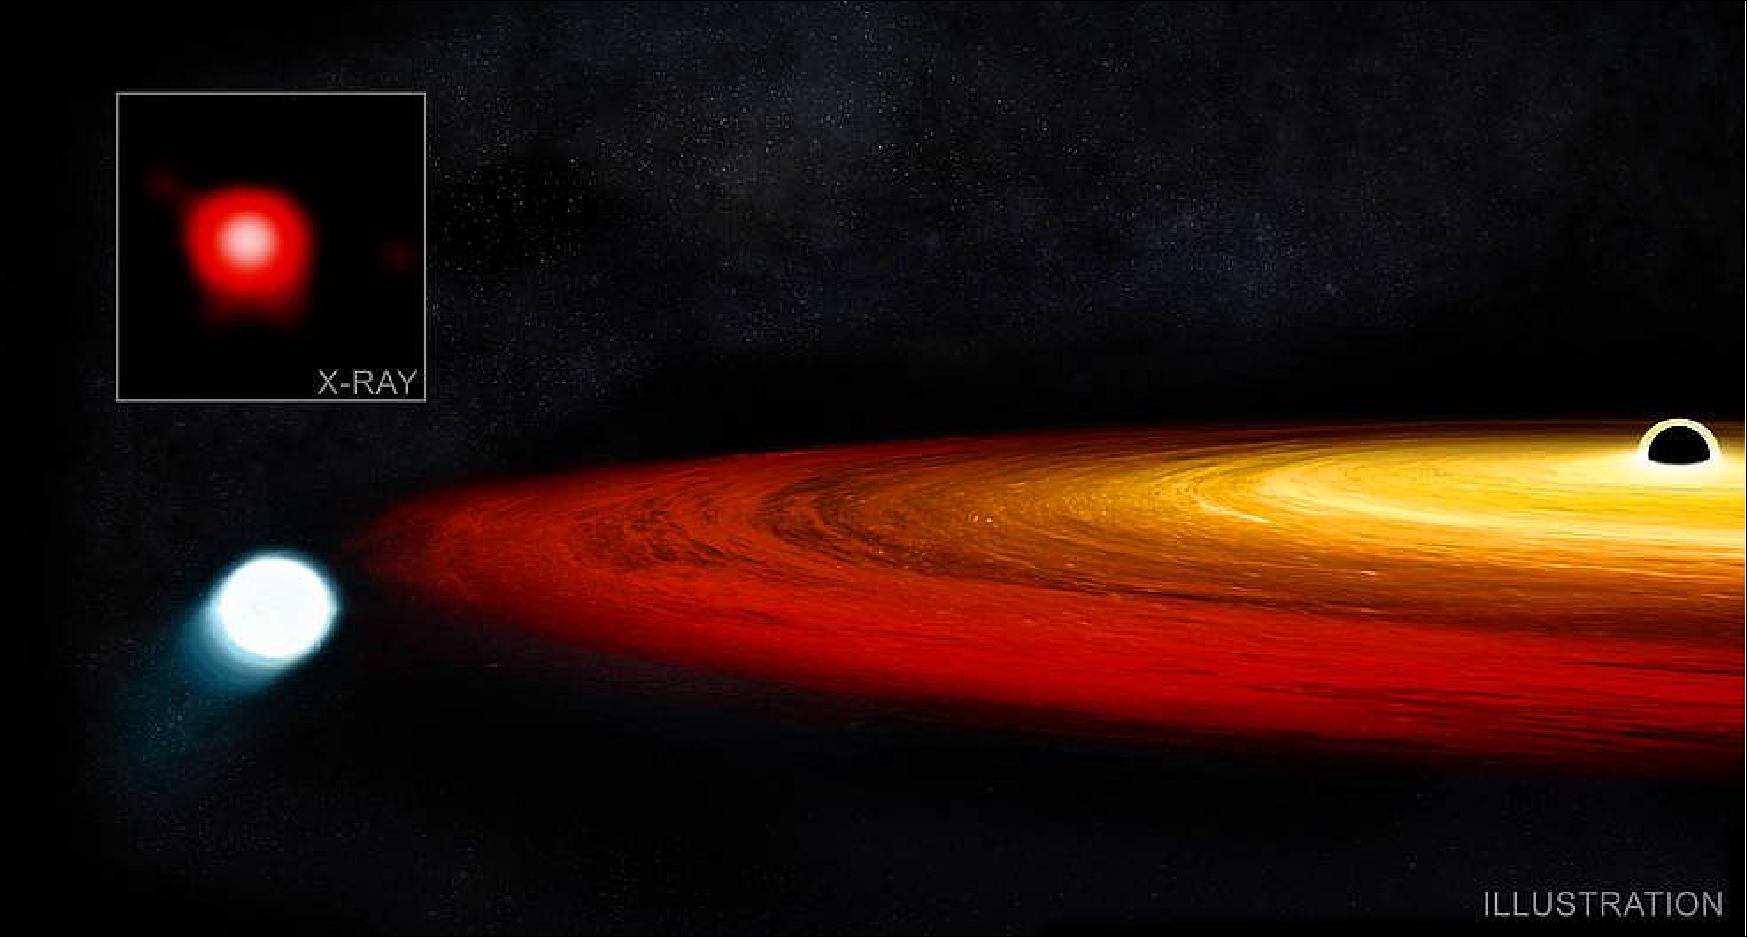 Figure 25: Astronomers may have discovered a new kind of survival story: a star that had a brush with a giant black hole and lived to tell the tale through exclamations of X-rays. Data from NASA’s Chandra X-ray Observatory and ESA’s XMM-Newton uncovered the account that began with a red giant star wandering too close to a supermassive black hole in a galaxy about 250 million light years from Earth. The black hole, located in a galaxy called GSN 069, has a mass about 400,000 times that of the Sun, putting it on the small end of the scale for supermassive black holes (image credit: X-ray: NASA/CXO/CSIC-INTA/G. Miniutti et al.; Illustration: NASA/CXC/M. Weiss)